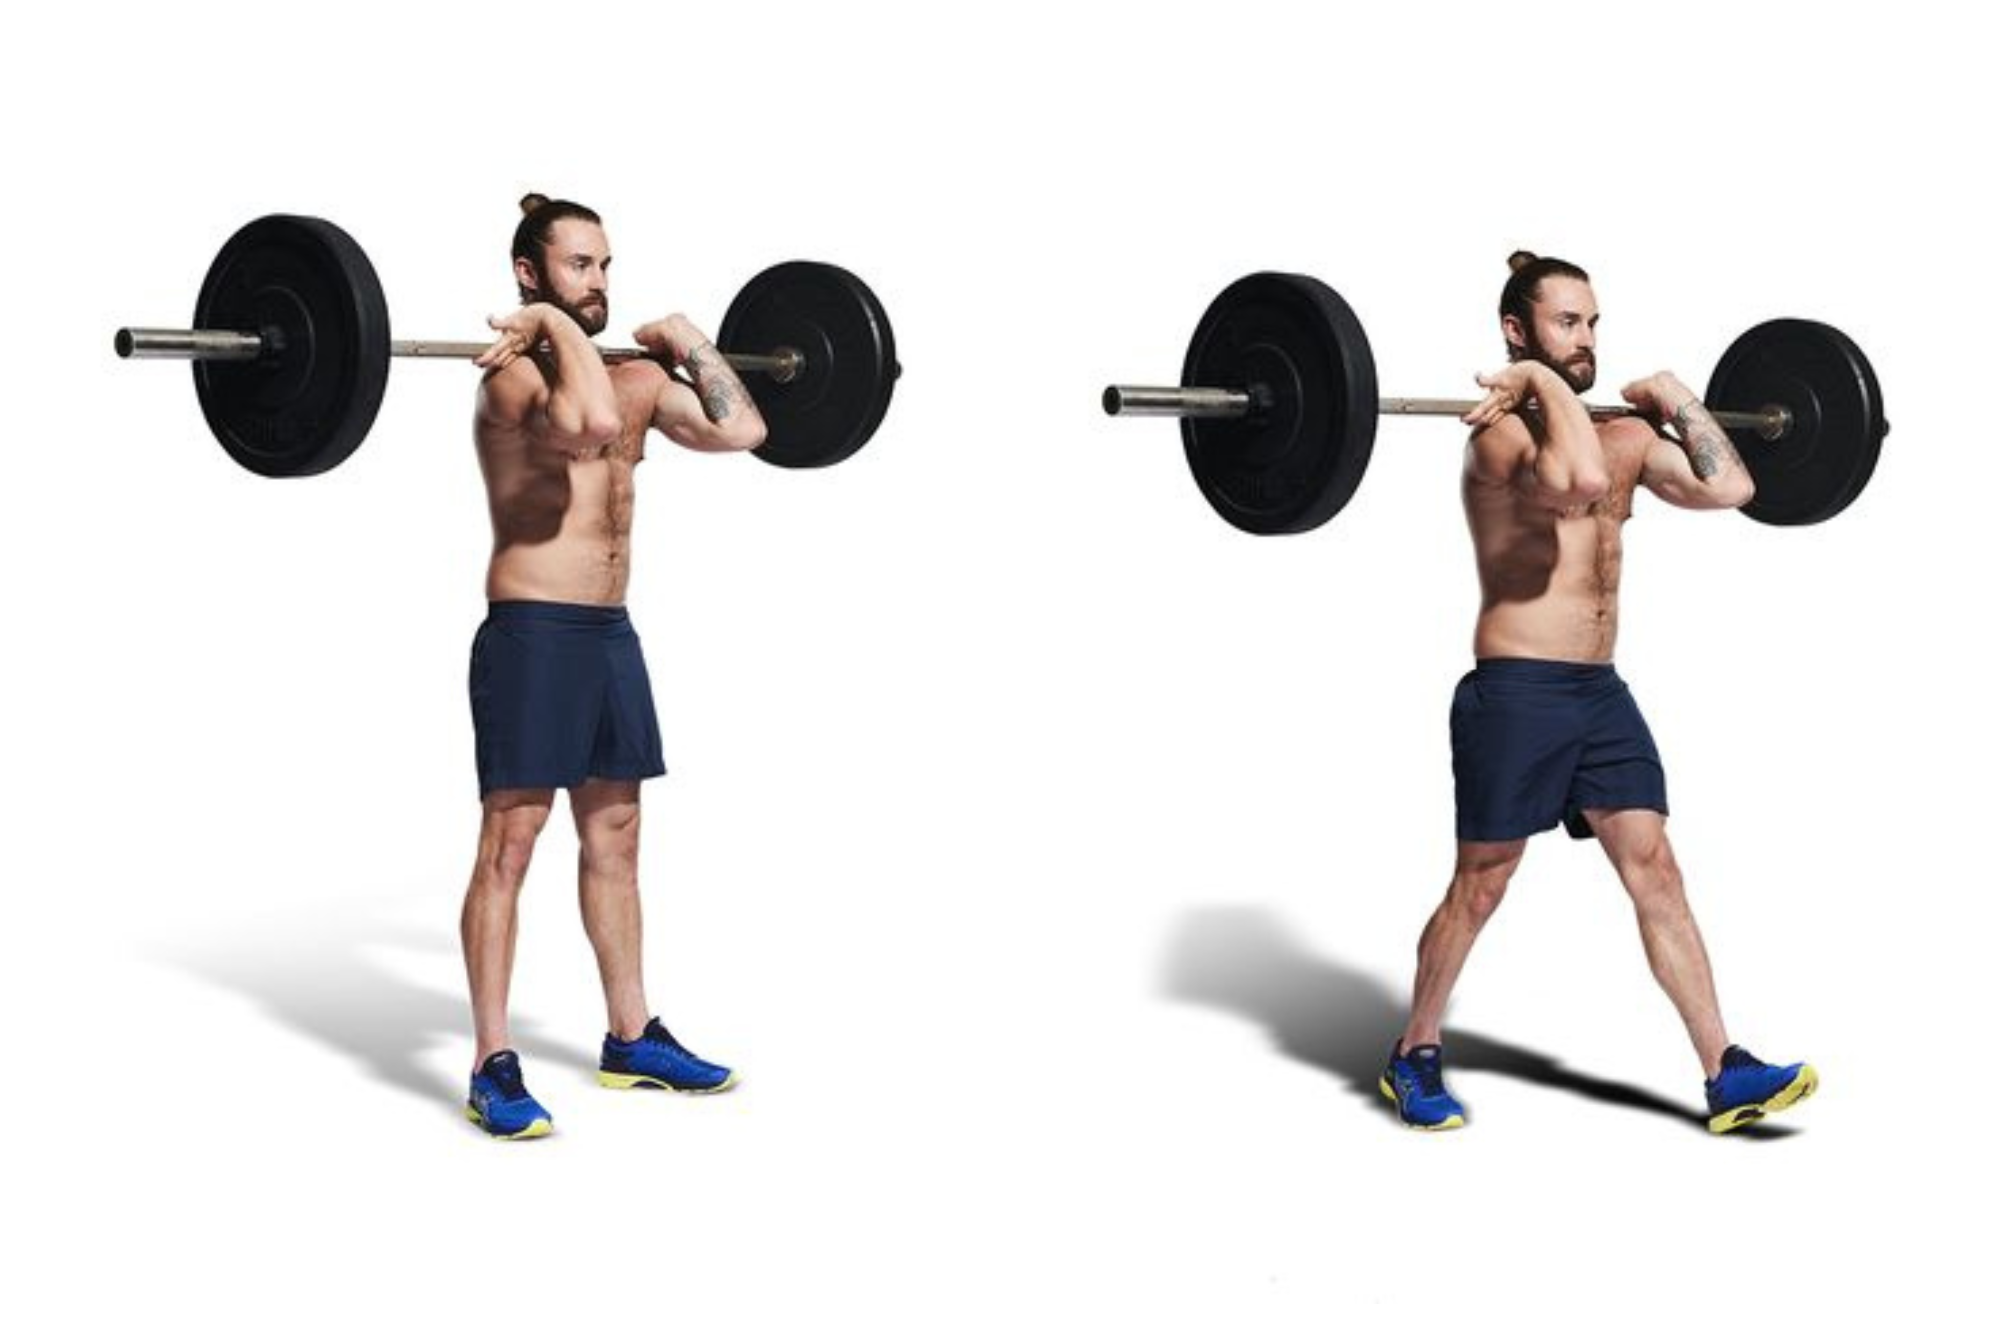 Know About Front Squat and Its Variations to Stay Strong